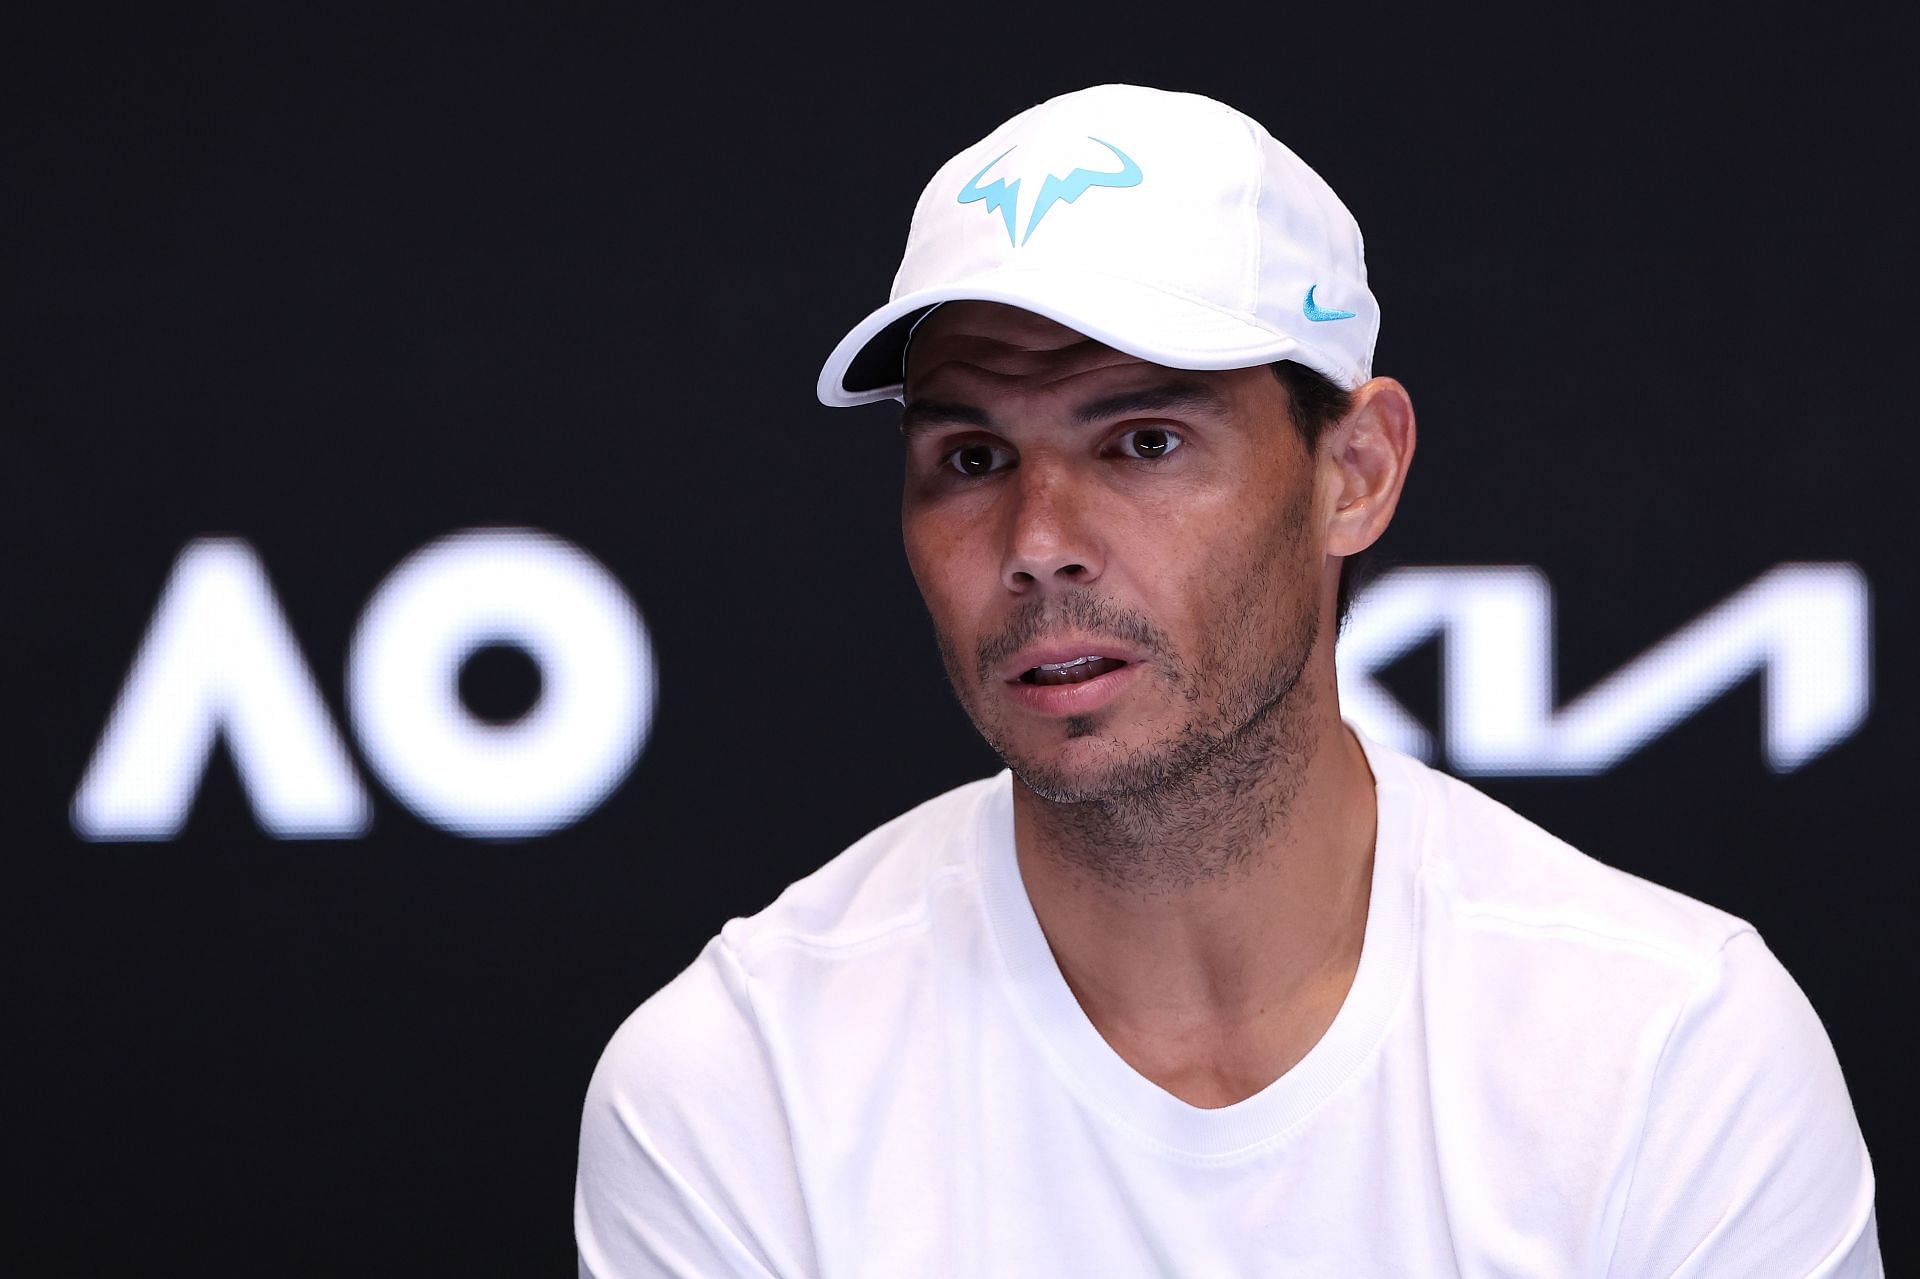 Rafael Nadal speaking to the media after his second round loss at the Australian Open 2023